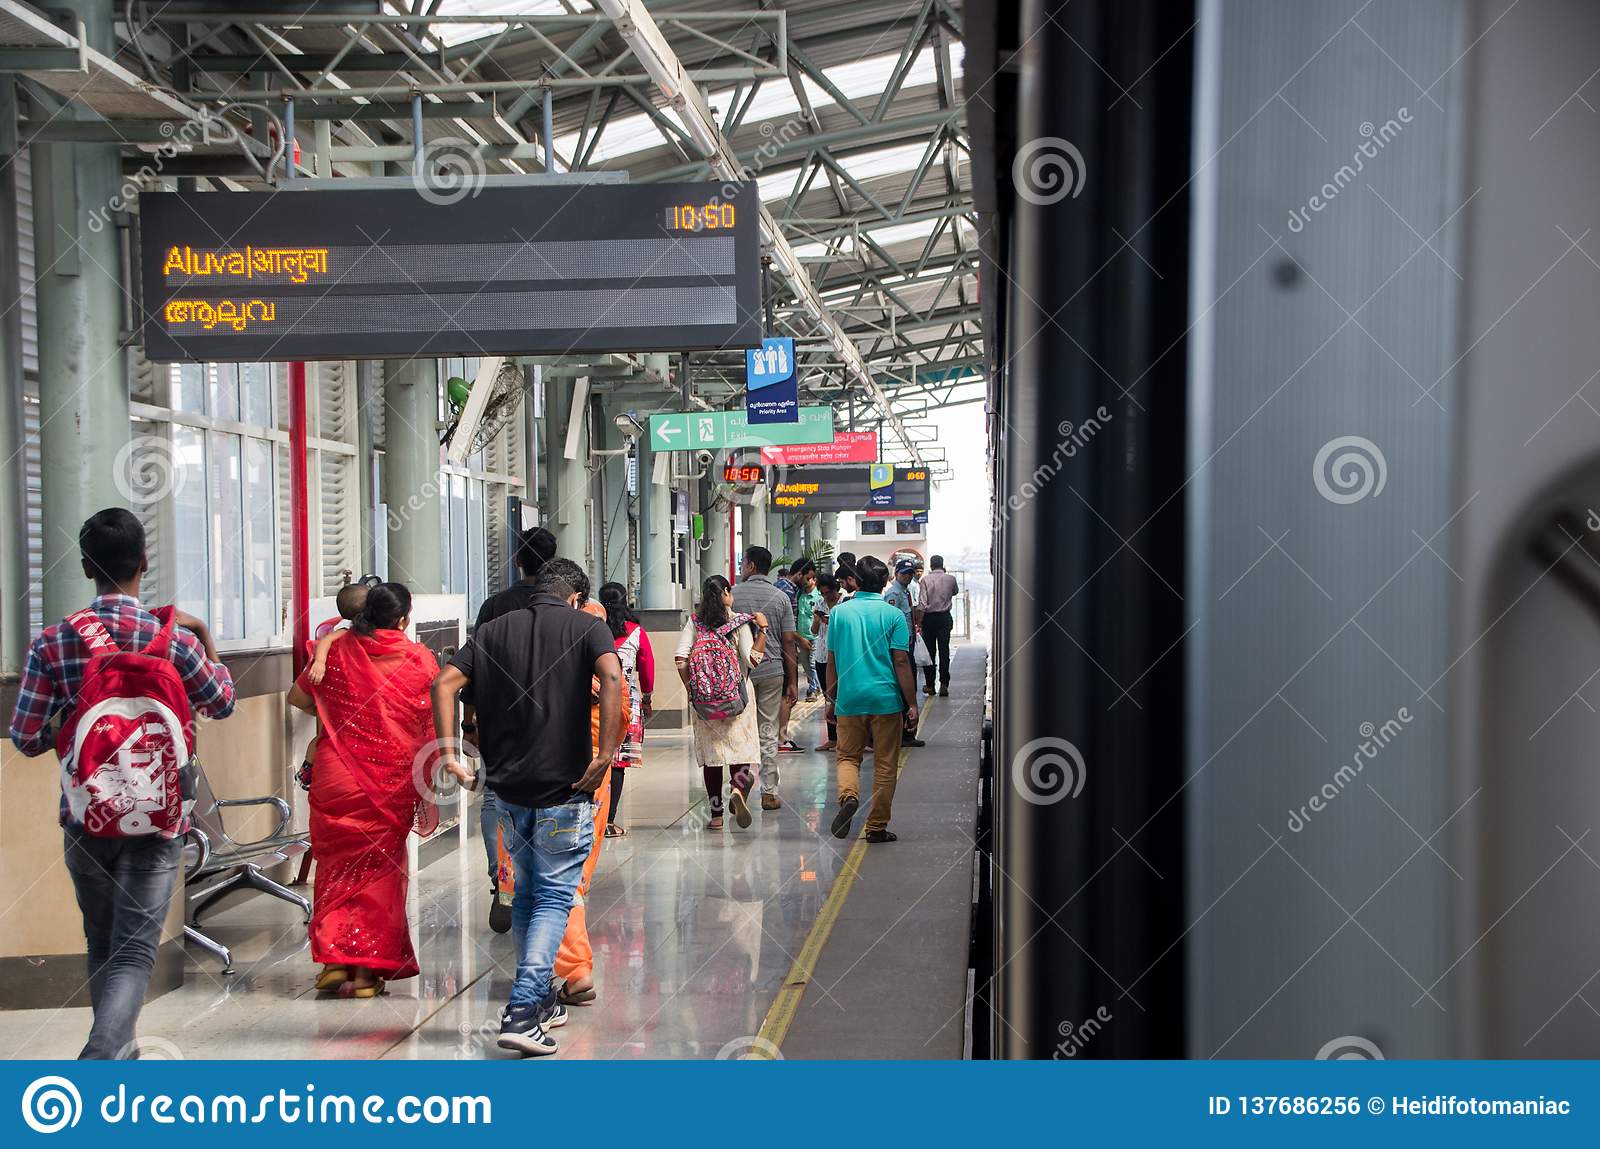 station announcement in hindi audio free download